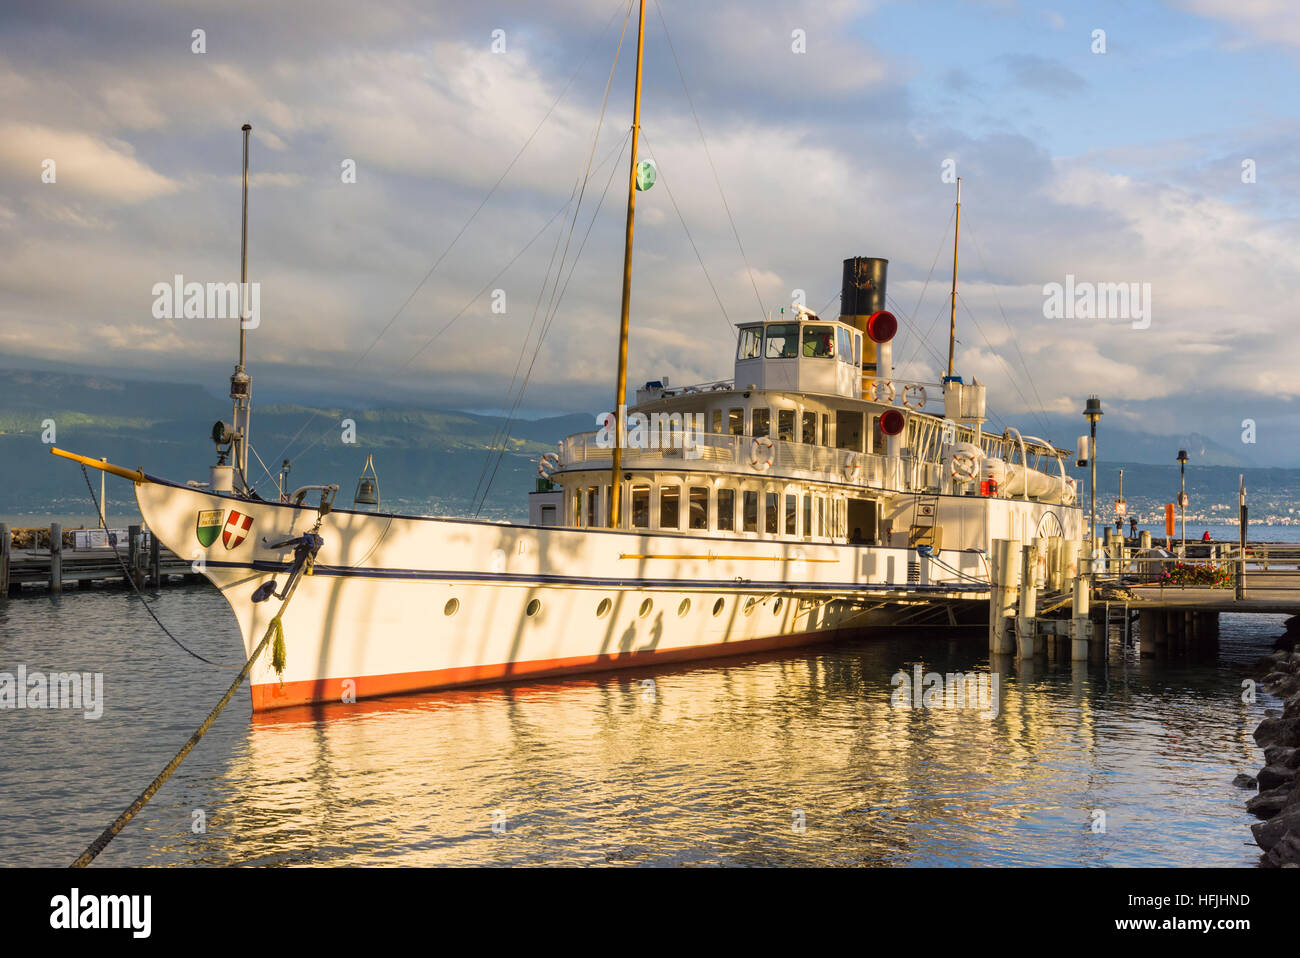 Paddle steamer in evening sun at the port of Ouchy, Lausanne, Switzerland Stock Photo